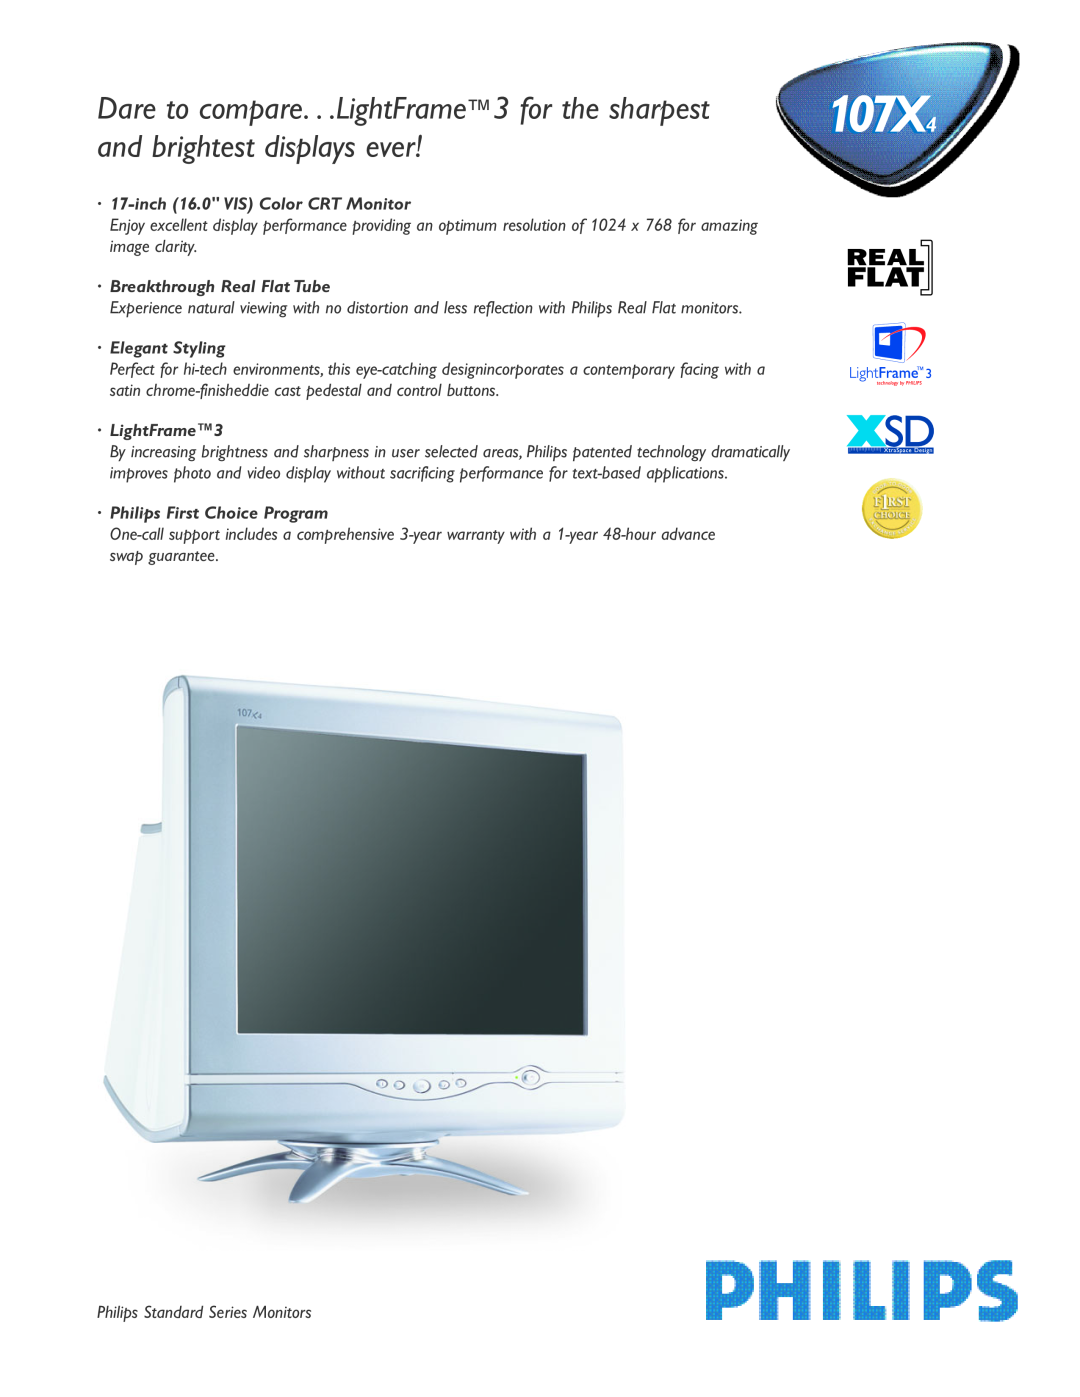 Philips warranty 107X44, ·17-inch16.0 VIS Color CRT Monitor, ·Breakthrough Real Flat Tube, ·Elegant Styling 